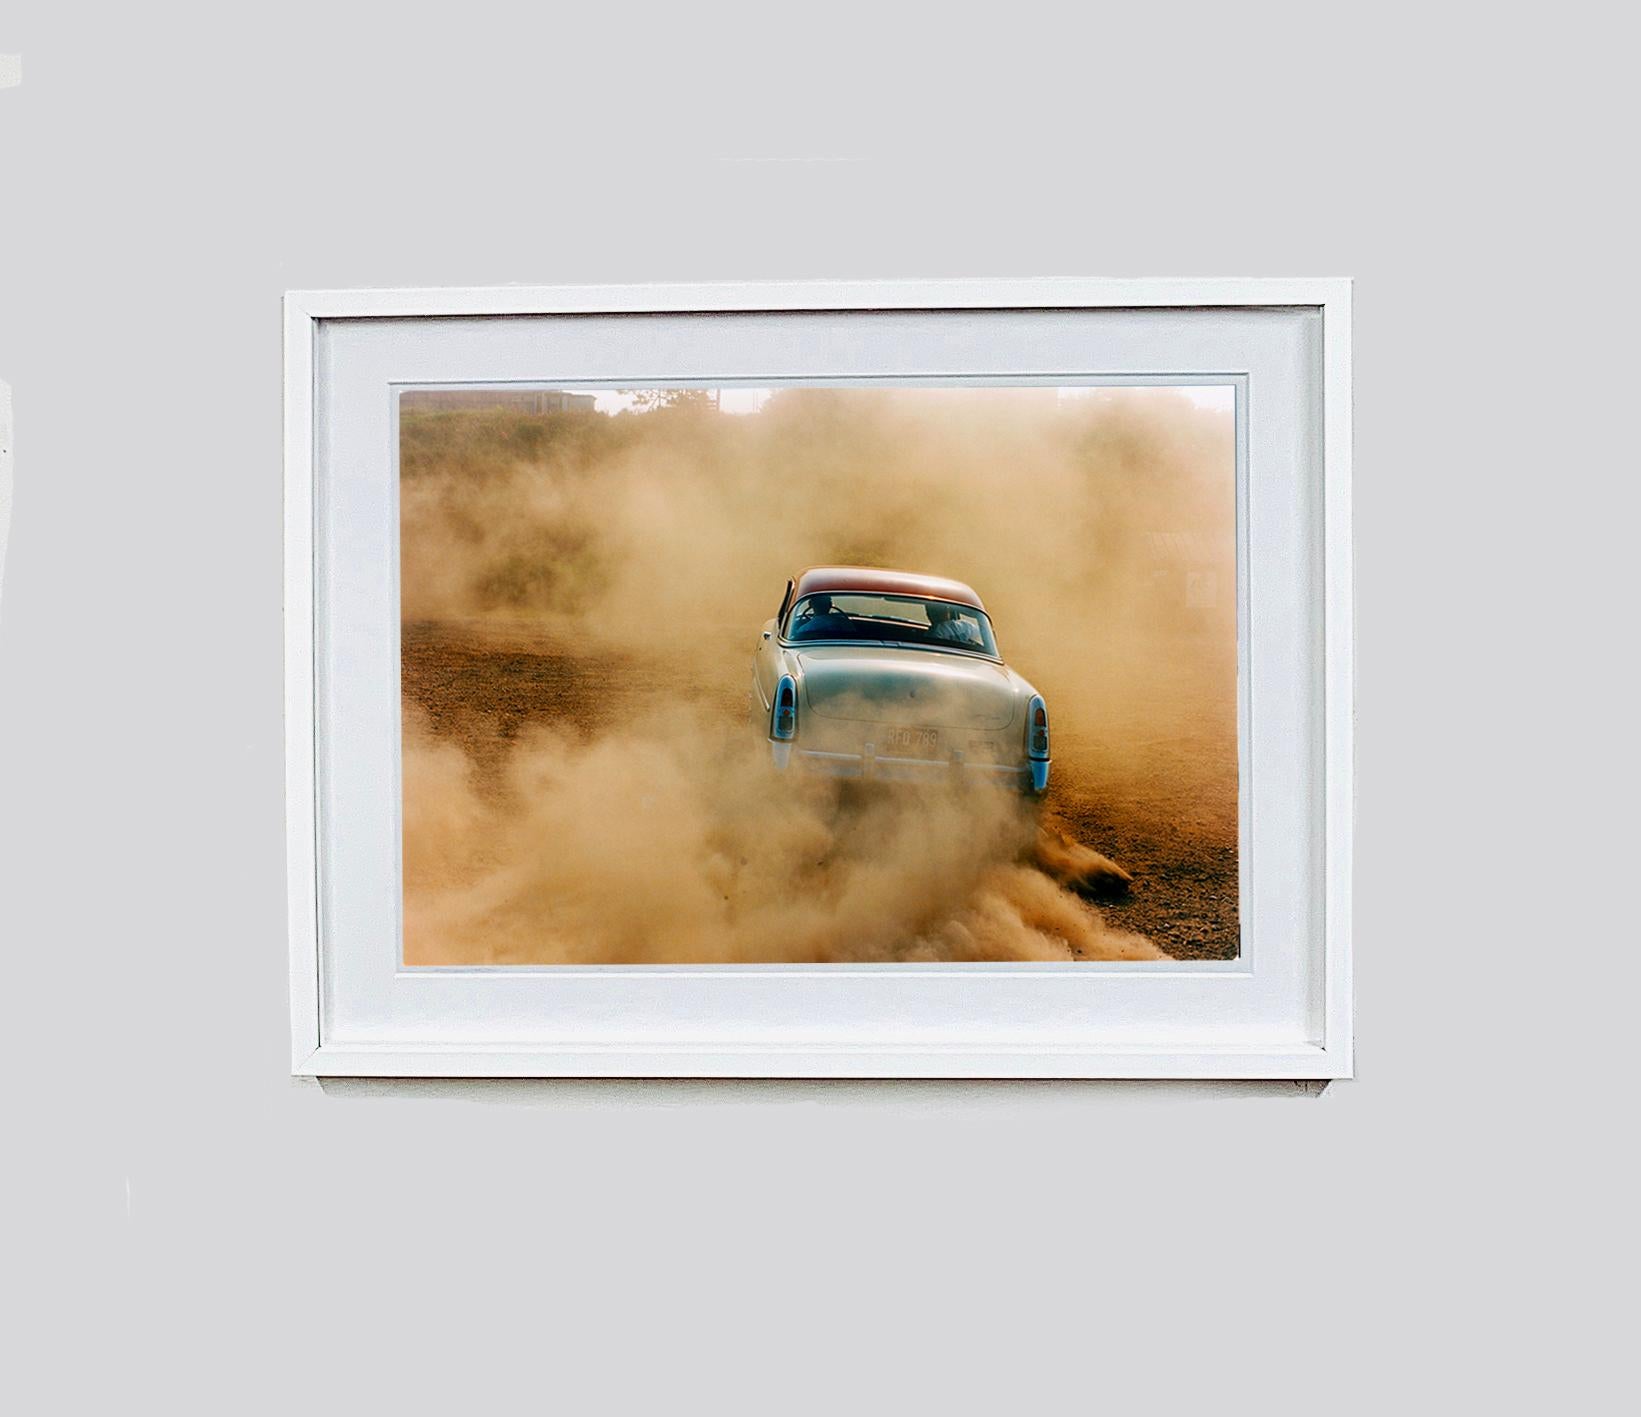 Mercury in the Dust, Hemsby, Norfolk - Car on a beach color photography - Contemporary Photograph by Richard Heeps